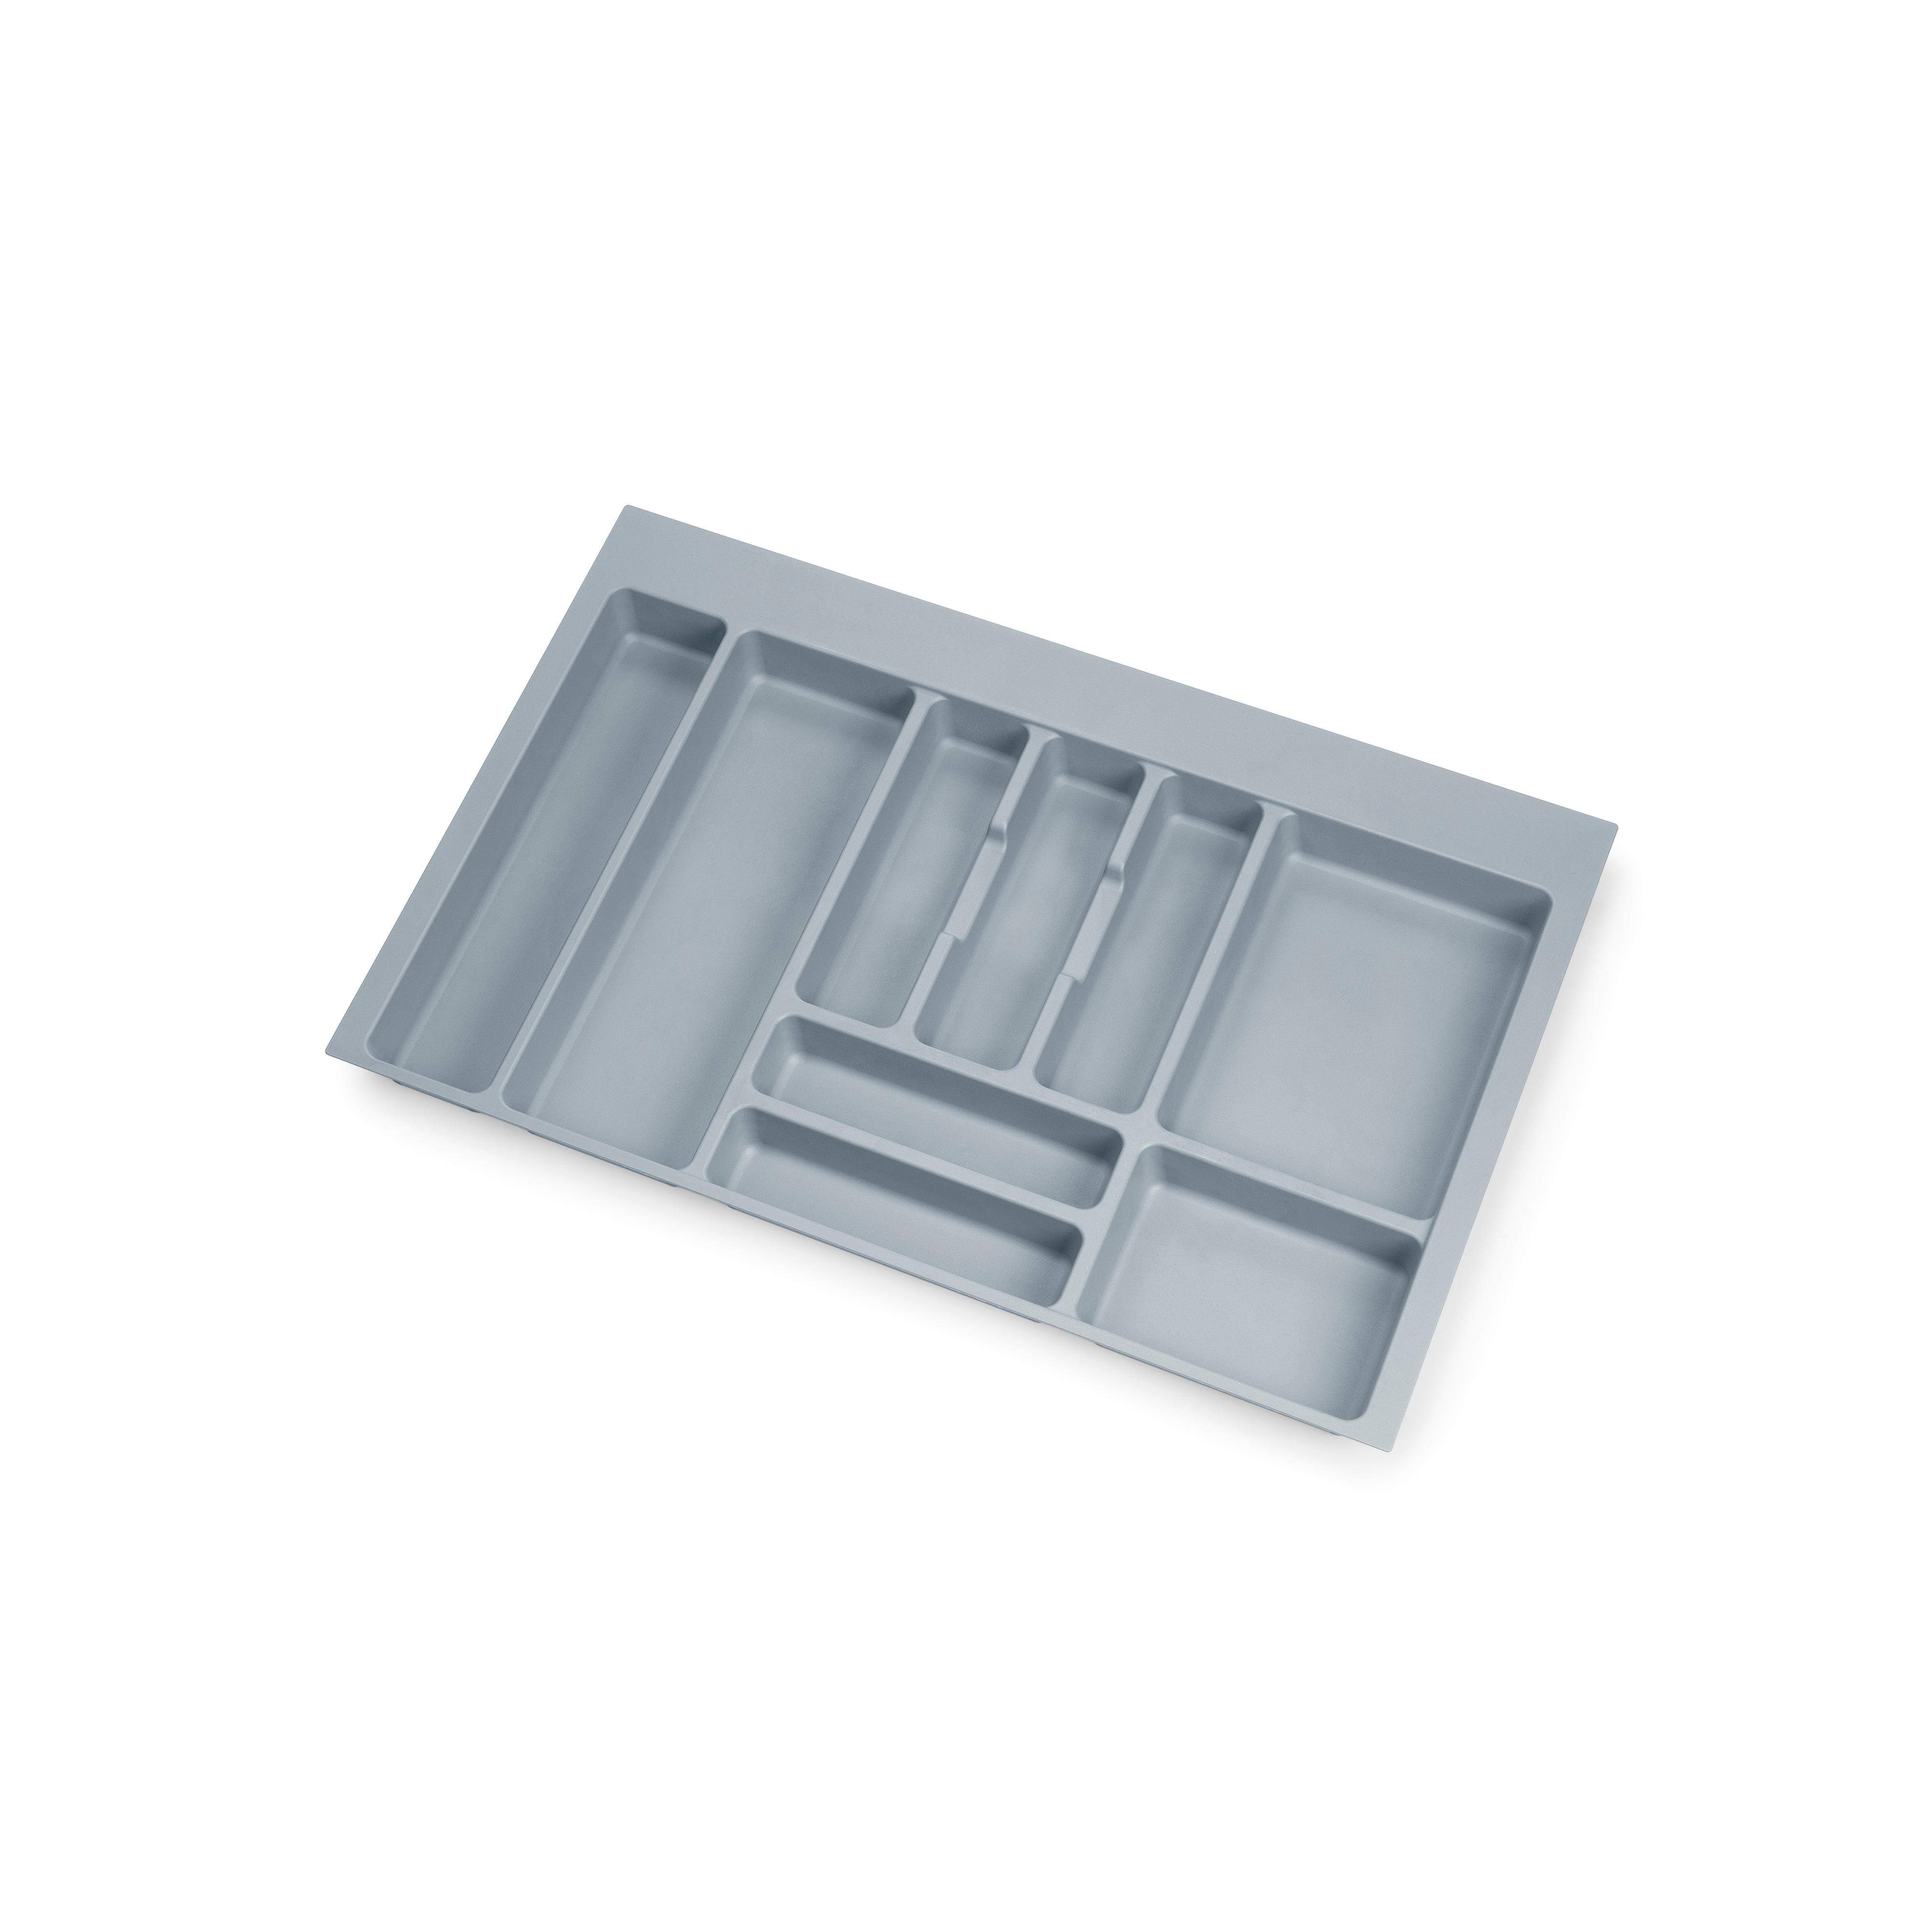 Cutlery tray for kitchen drawers, for cabinet 800mm, grey plastic